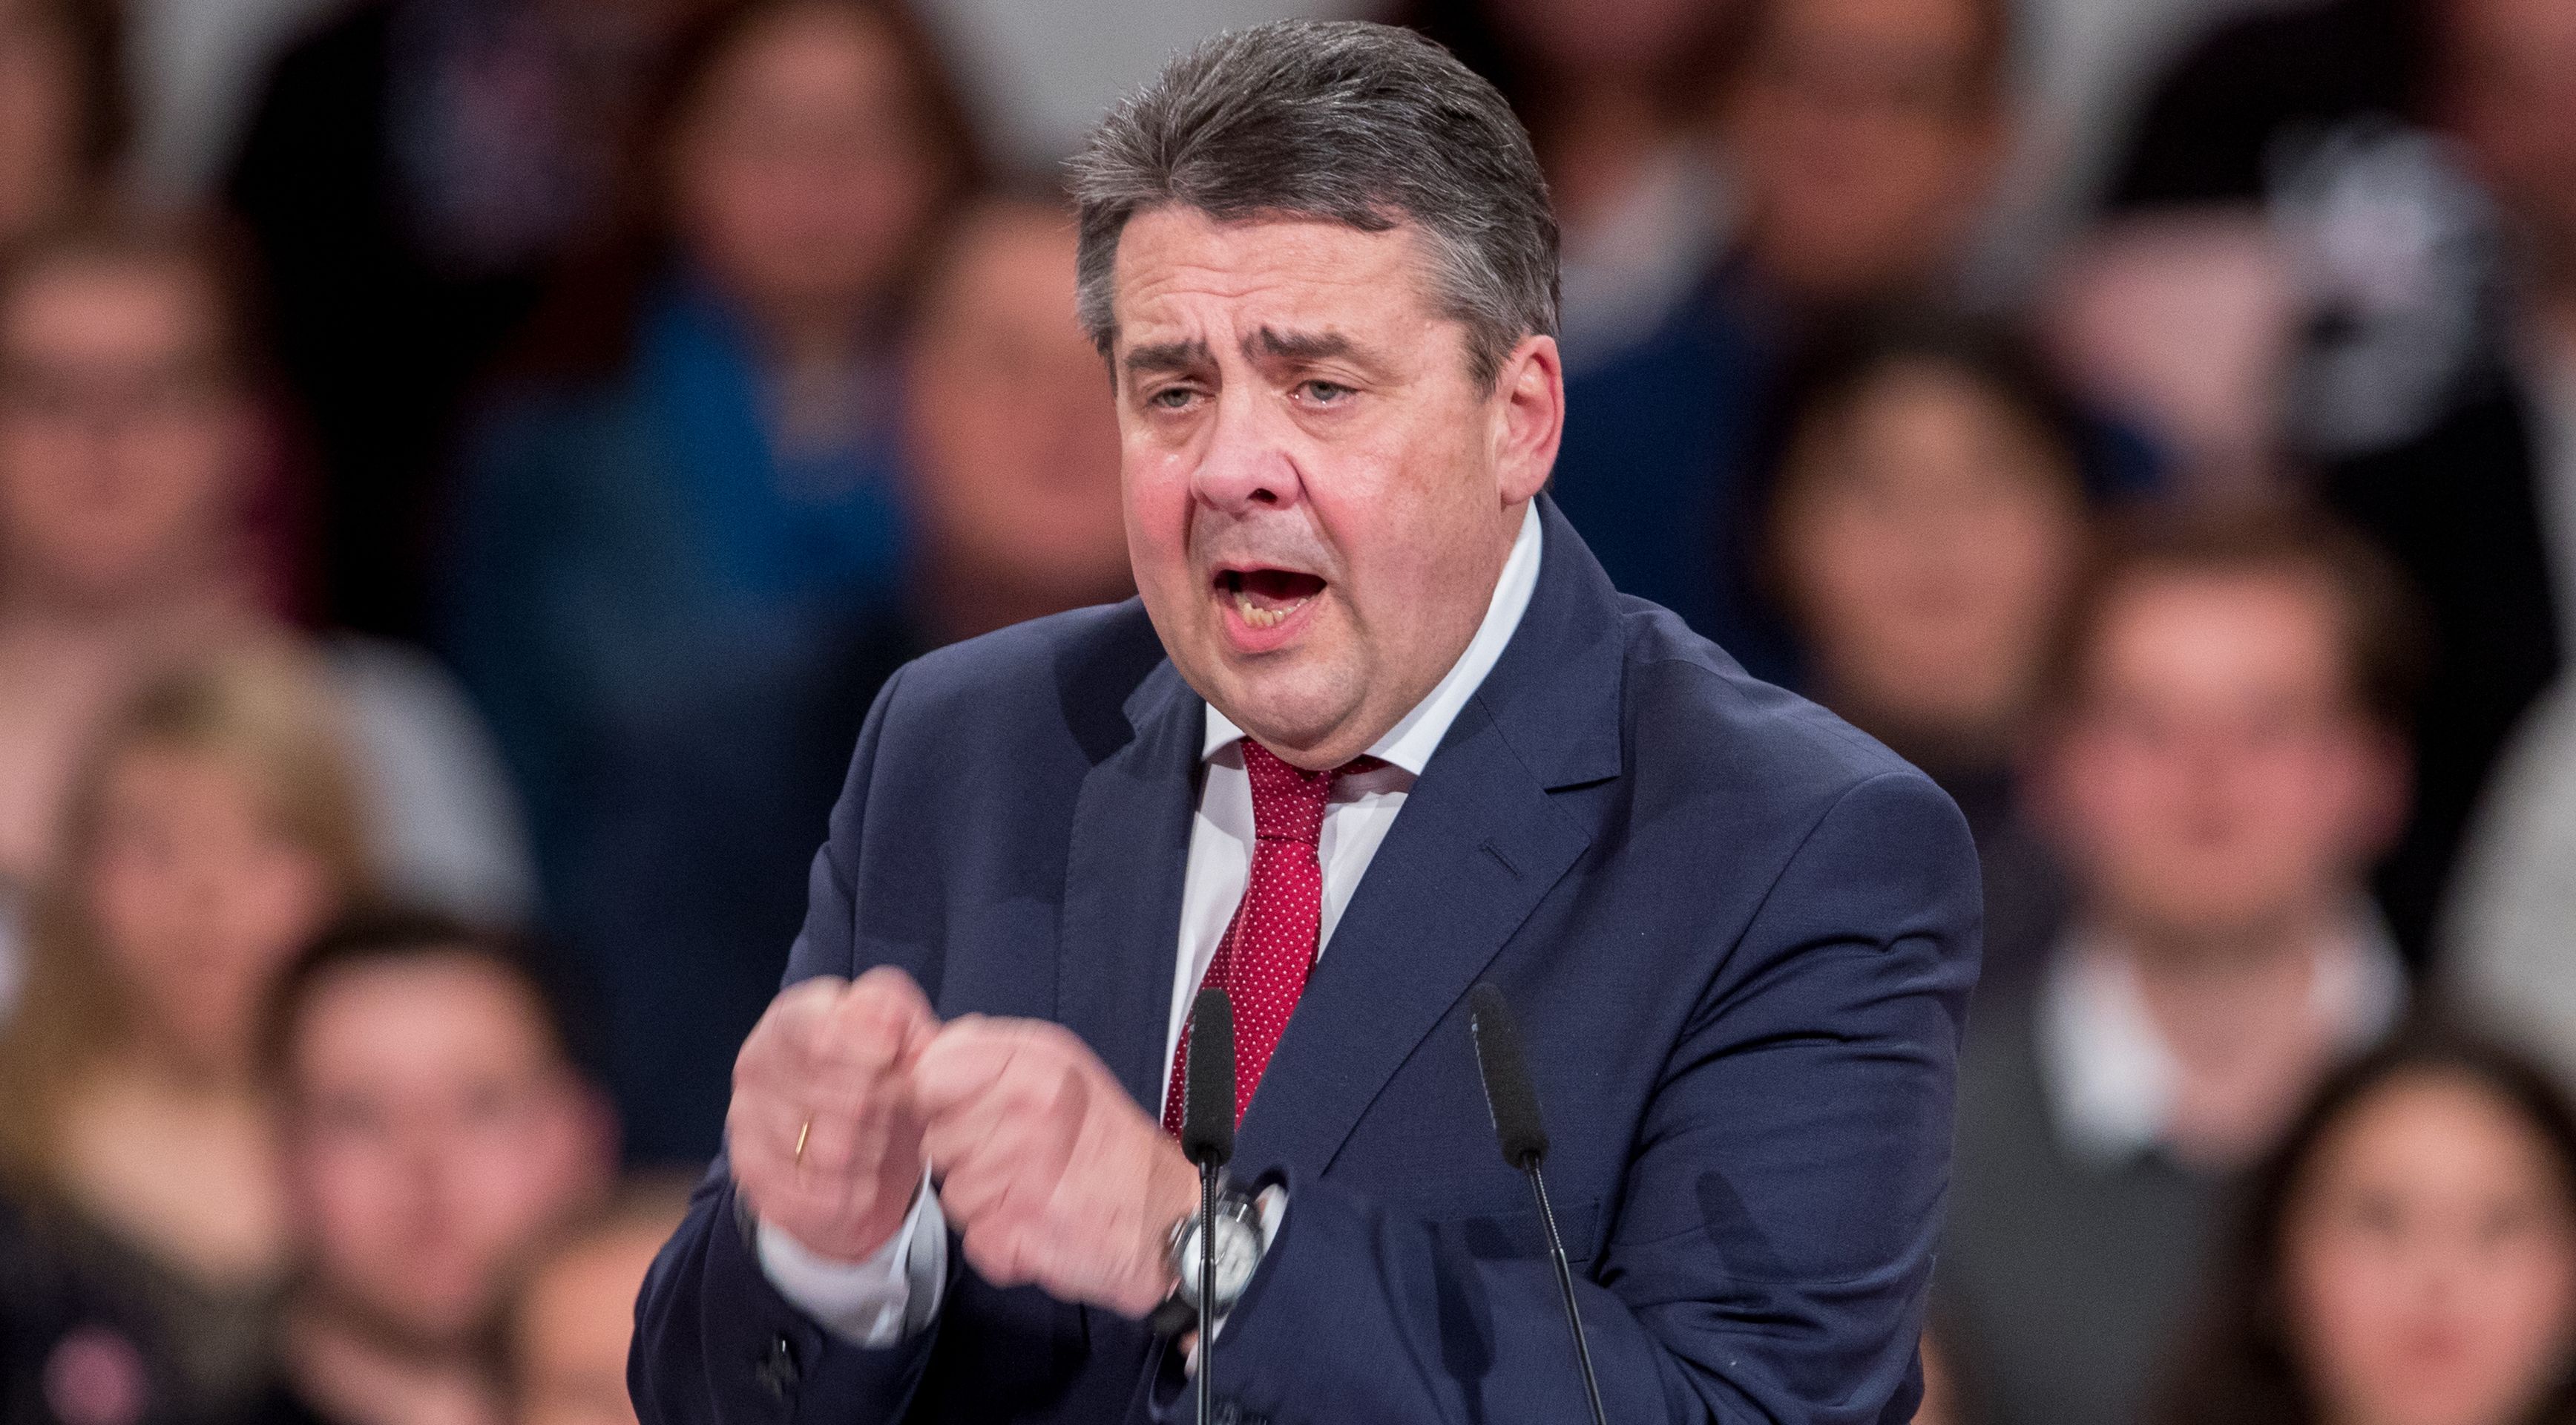 Sigmar Gabriel, outgoing chairman of the SPD speaks at the special Federal Party Conference in Berlin, Germany, 19 March 2017. This sunday will see the SPD vote for Martin Schulz as their new leader. Photo: Michael Kappeler/dpa